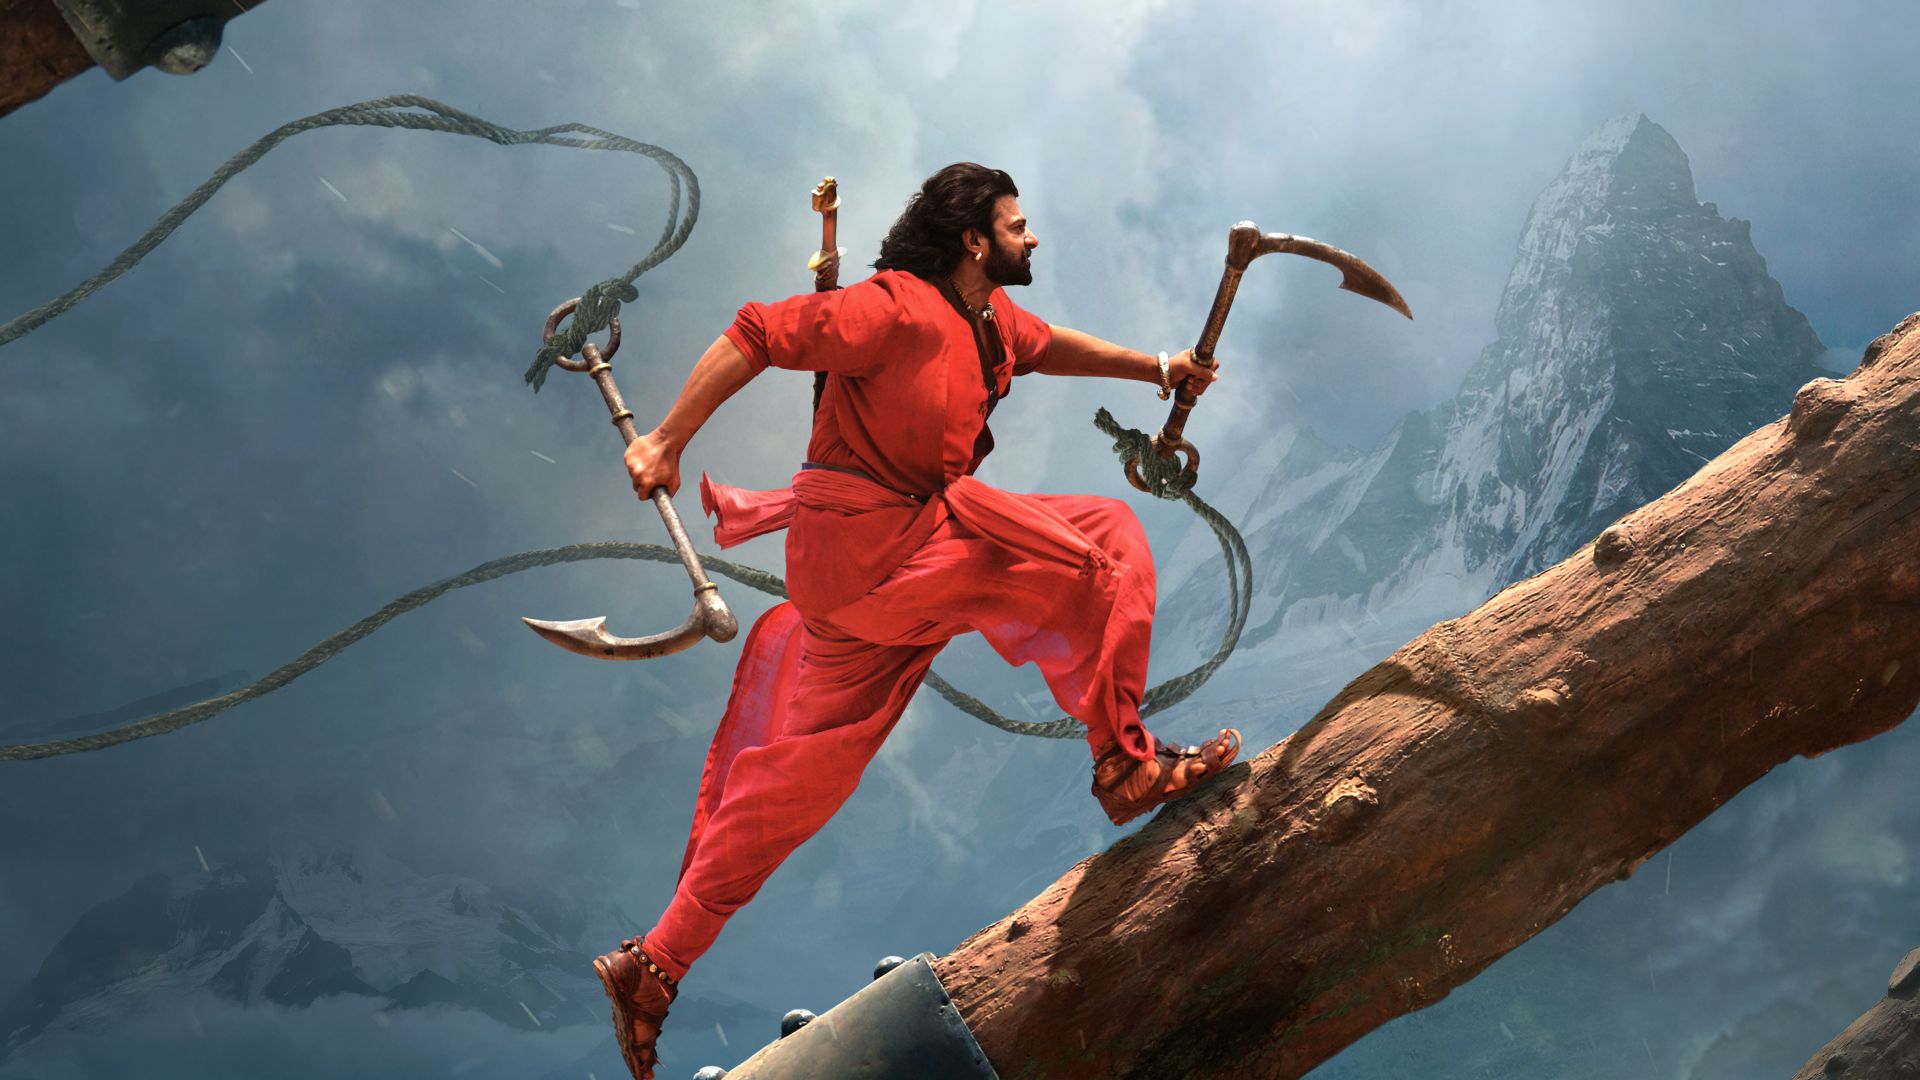 Desktop Wallpaper Baahubali 2: The Conclusion, Bollywood Movie, Prabhas,  Run, 4k, Hd Image, Picture, Background, T Doq